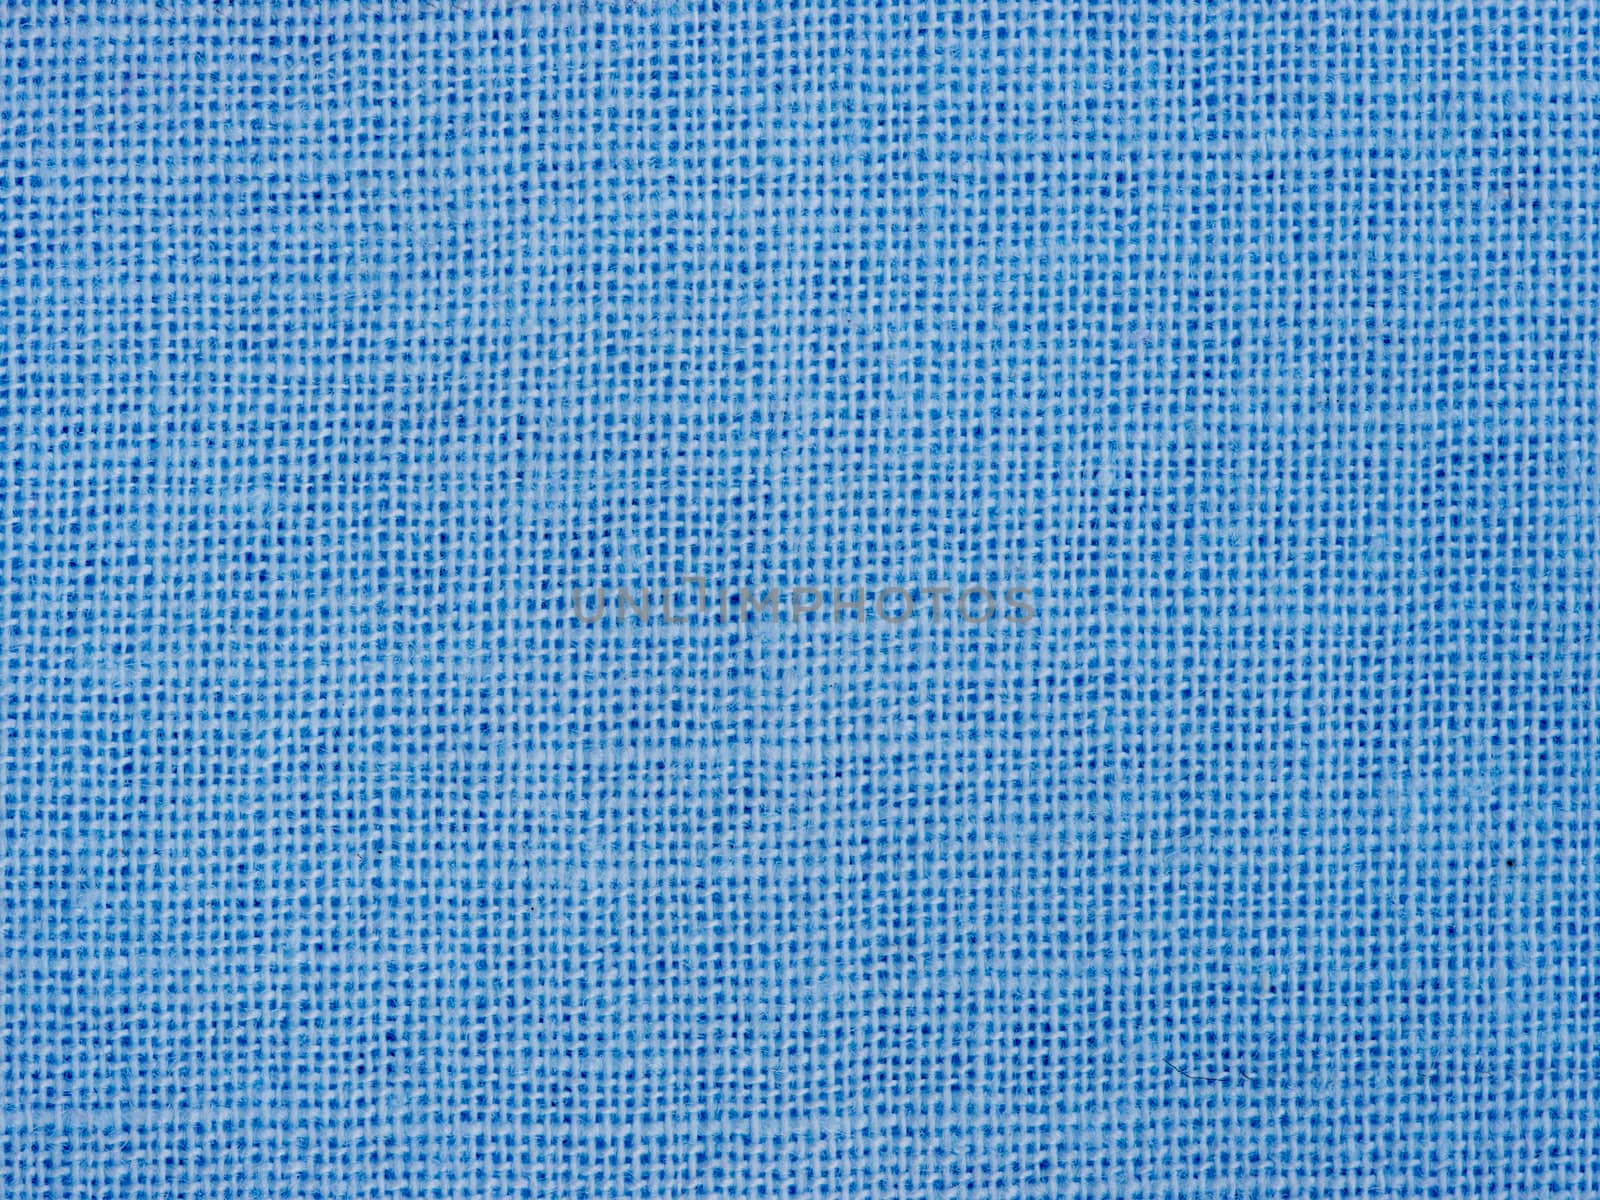 Natural blue cotton fabric weaving close up as background texture